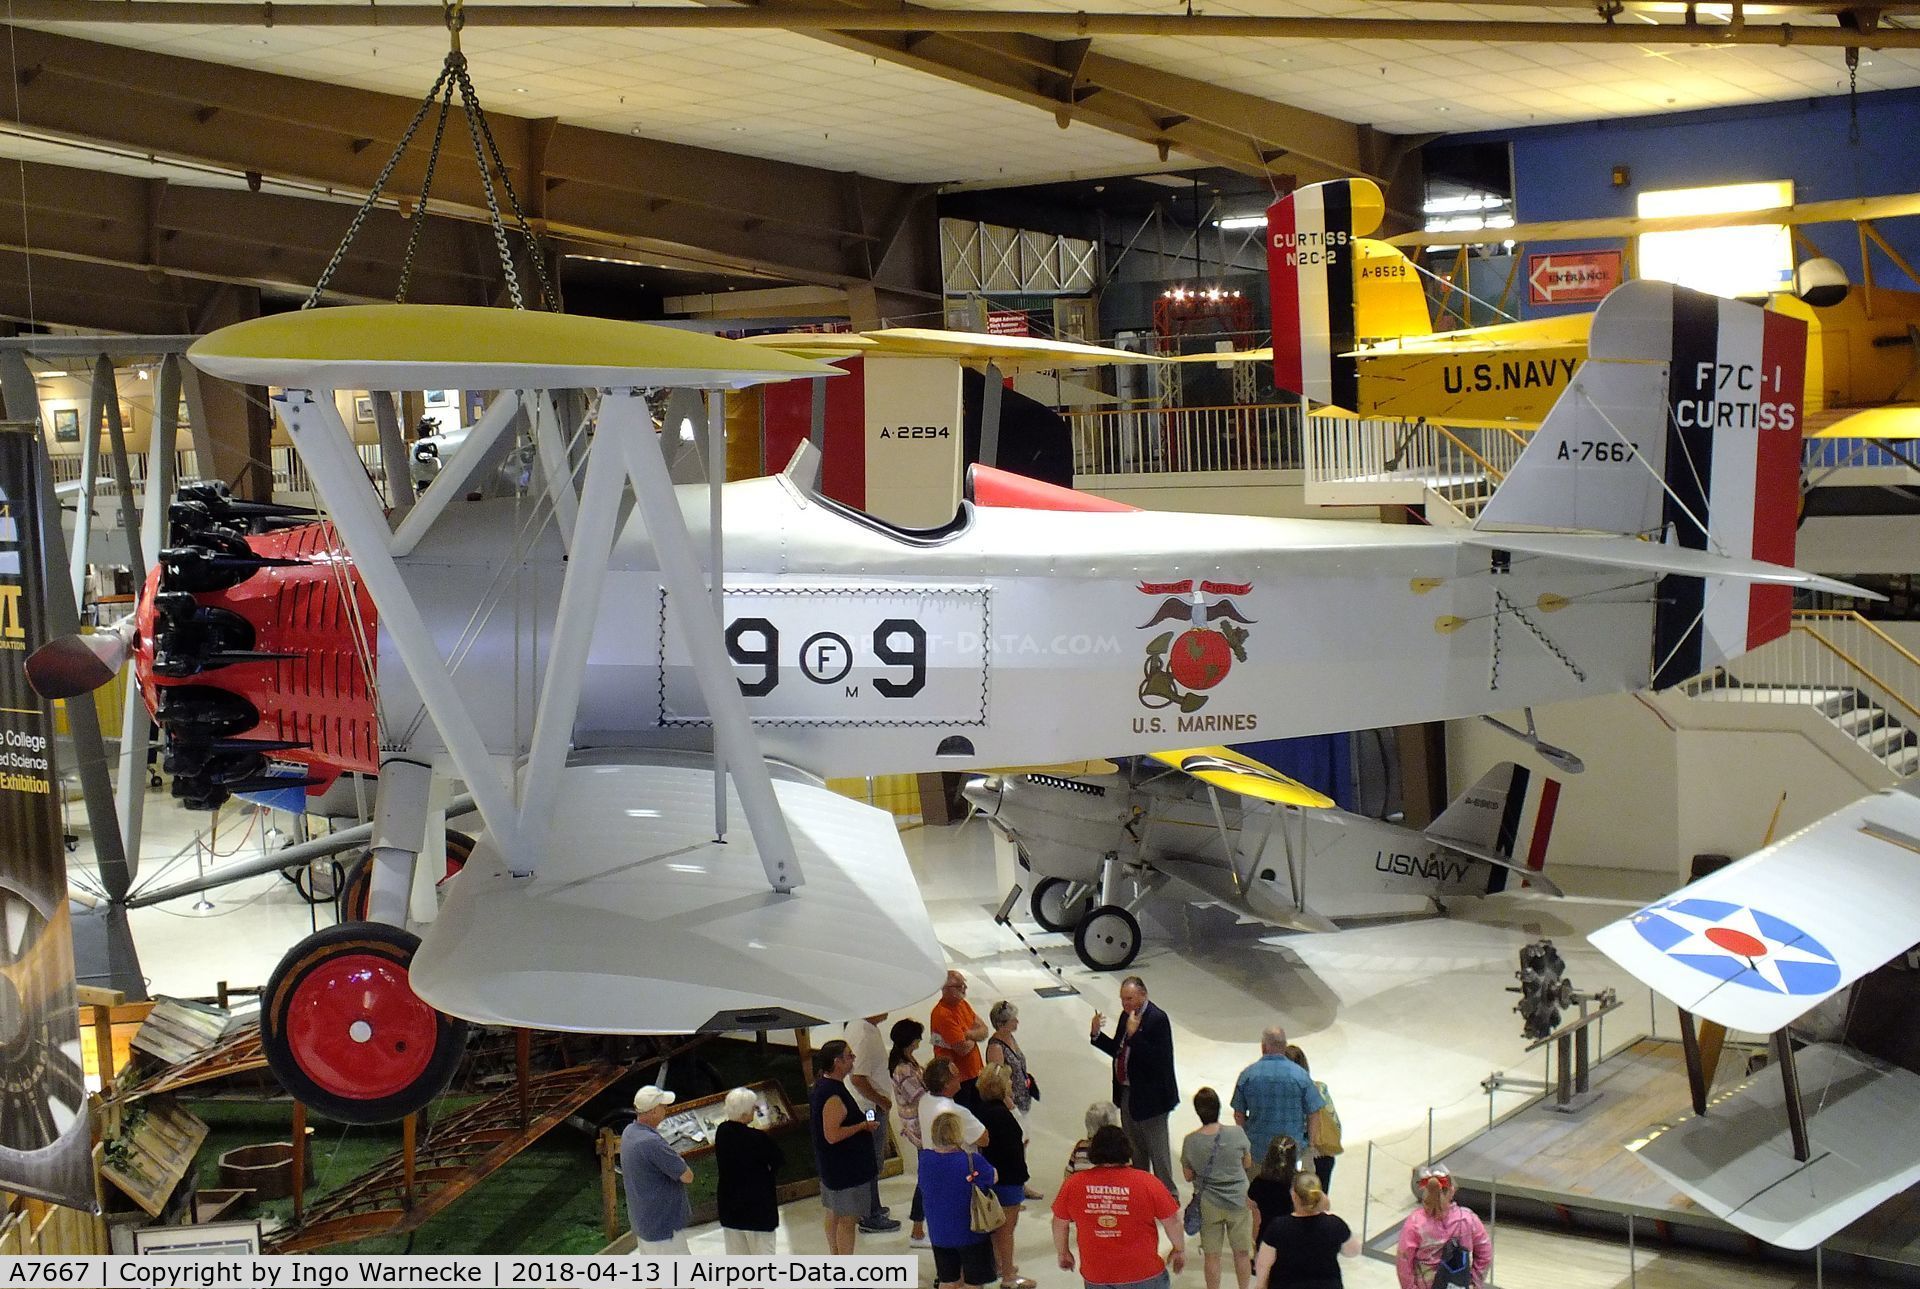 A7667, 1928 Curtiss F7C-1 C/N Not found A-7667, Curtiss F7C-1 Seahawk at the NMNA, Pensacola